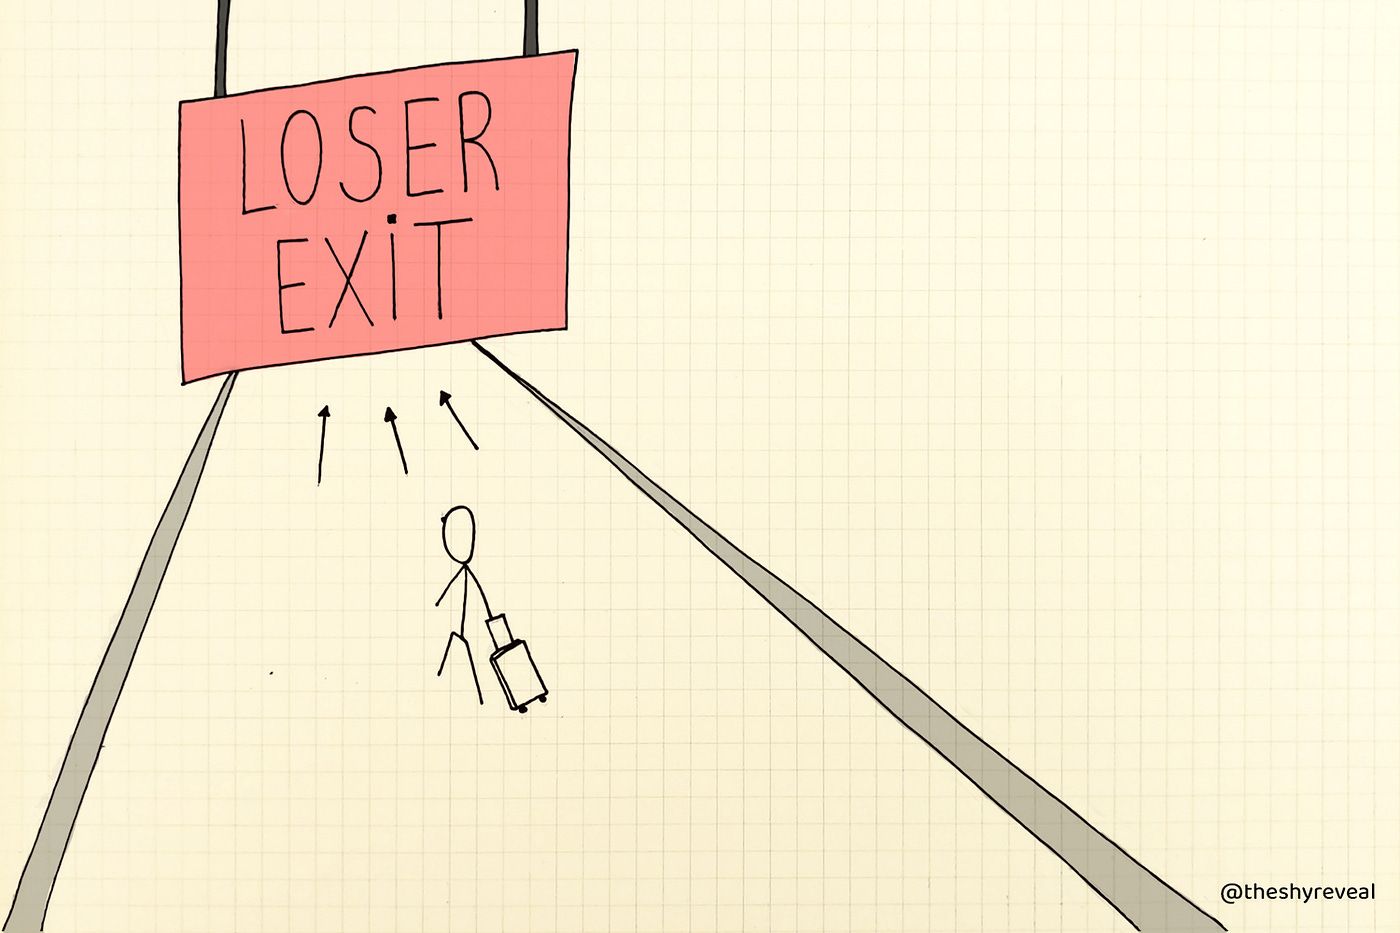 Stick figure with luggage walking towards the exit that says: “Loser Exit”.